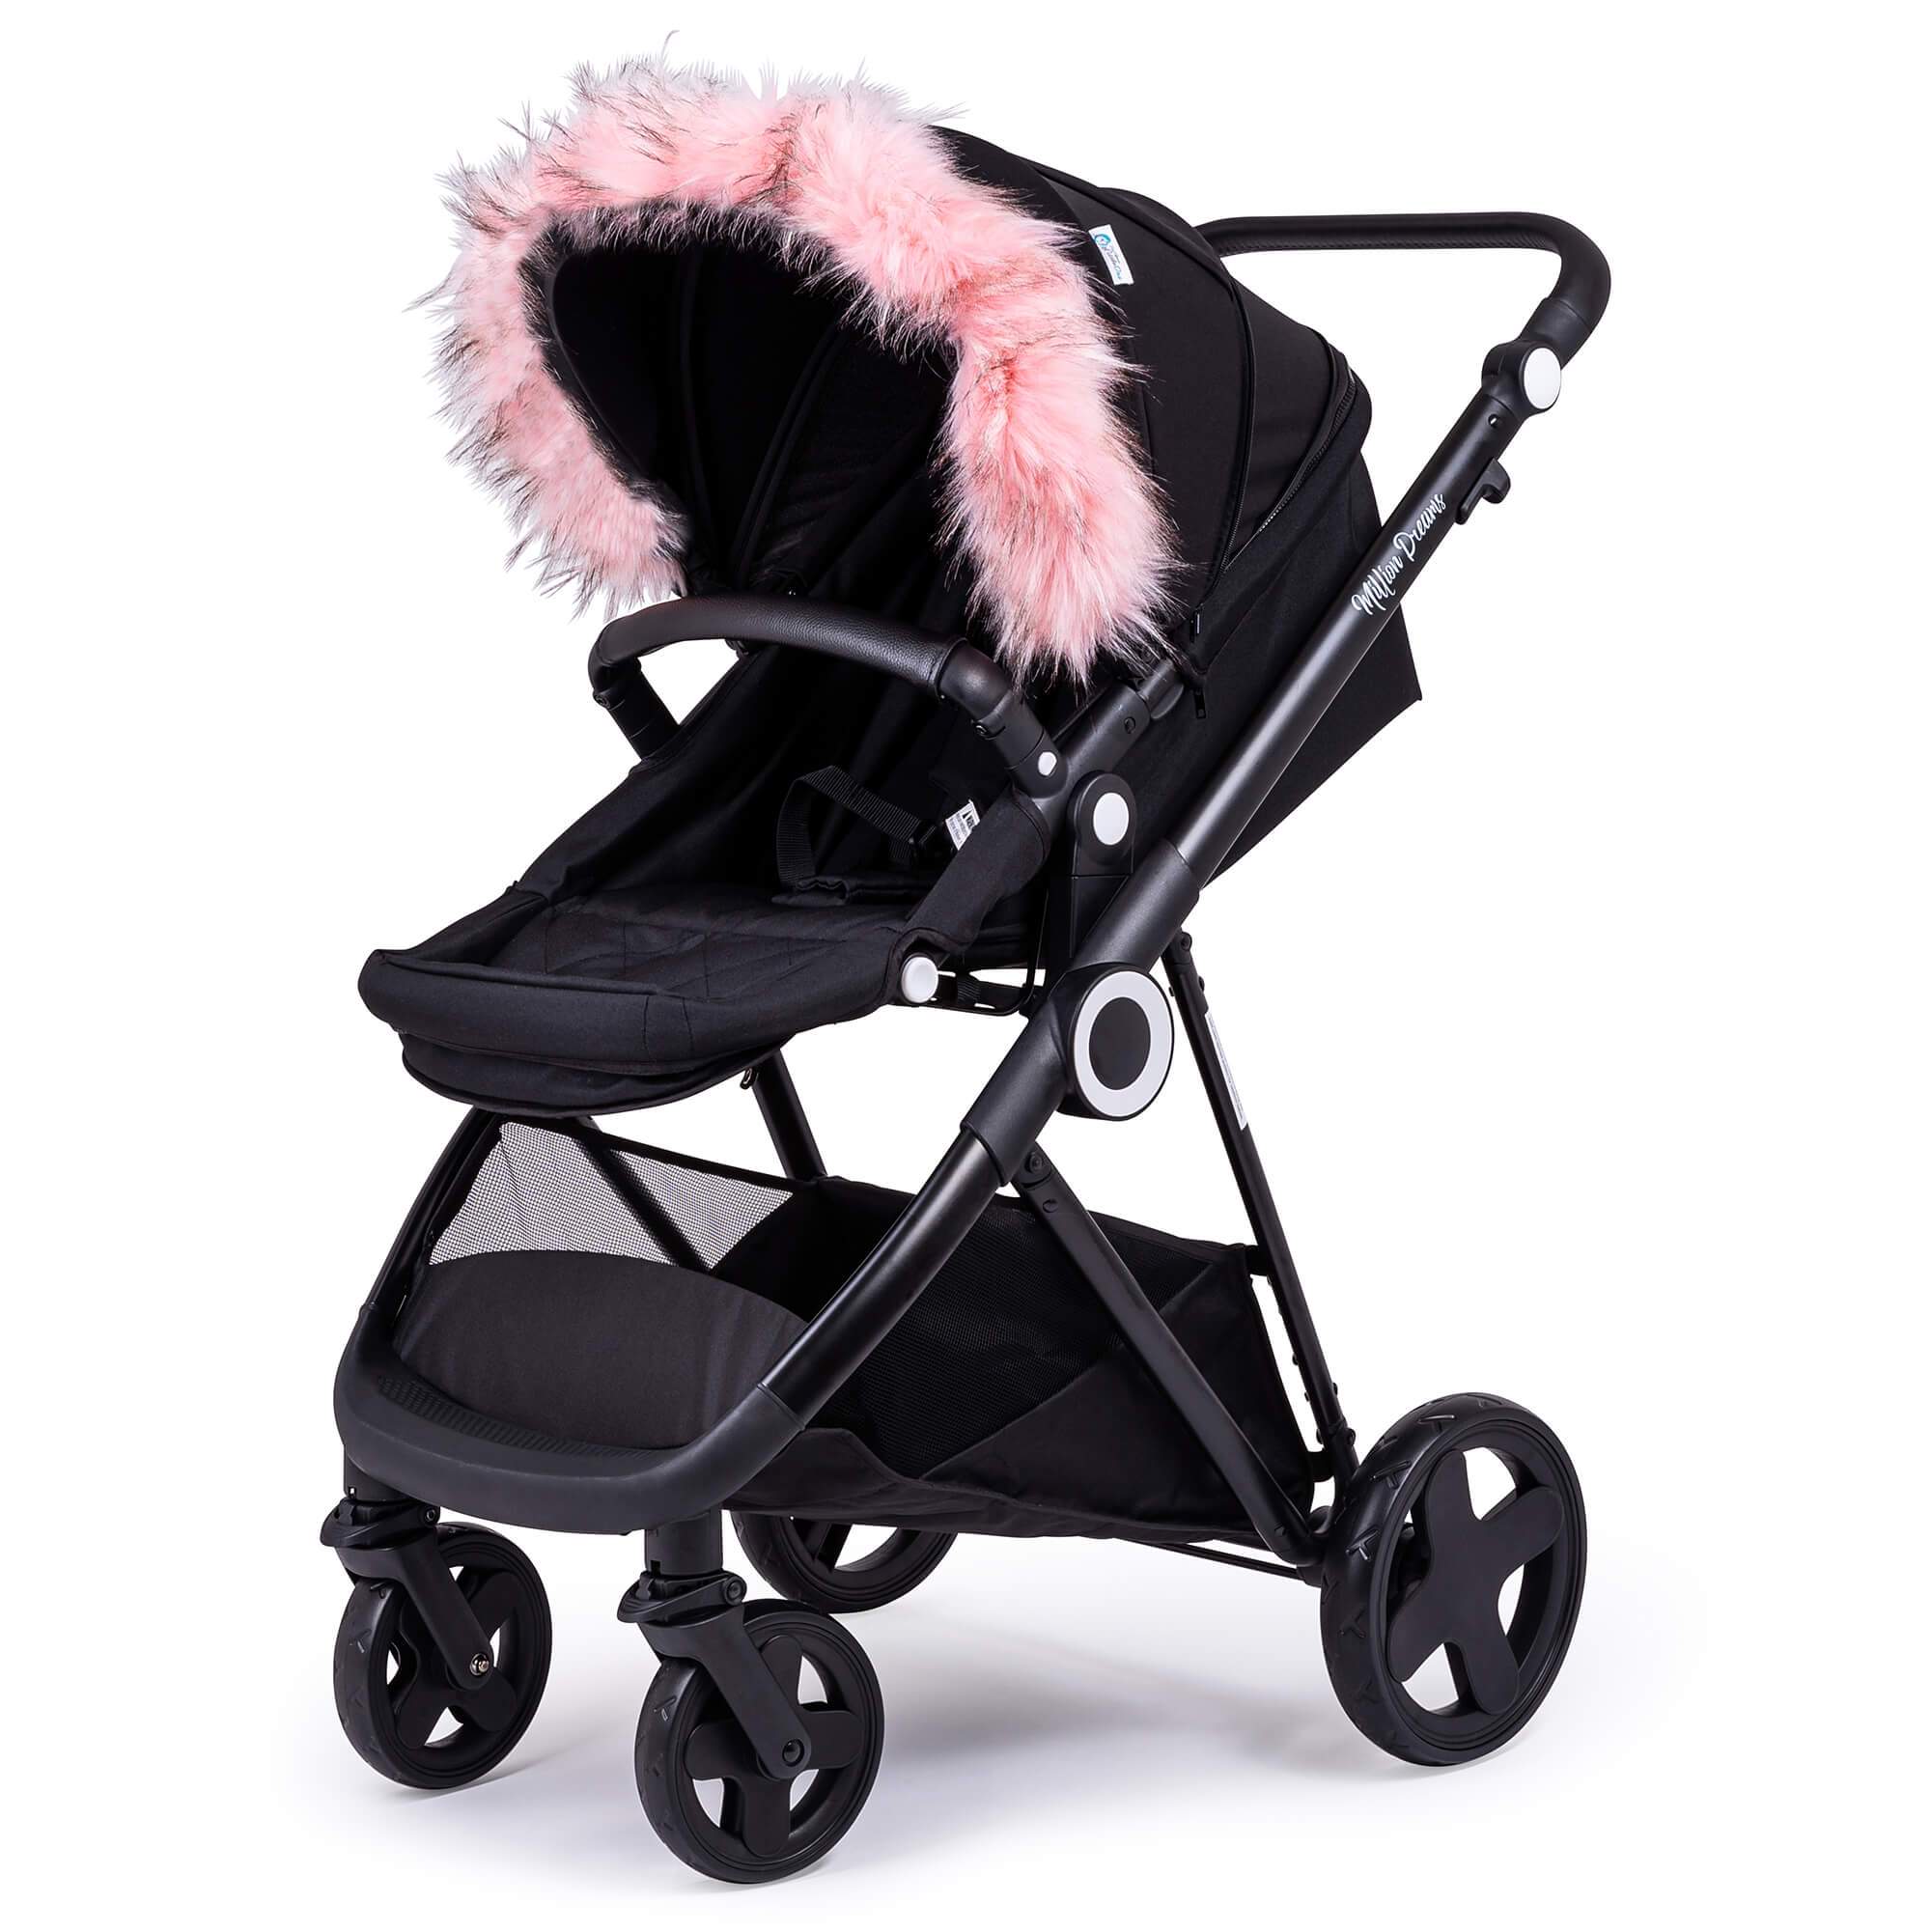 Pram Fur Hood Trim Attachment for Pushchair Compatible with XTS - Light Pink / Fits All Models | For Your Little One